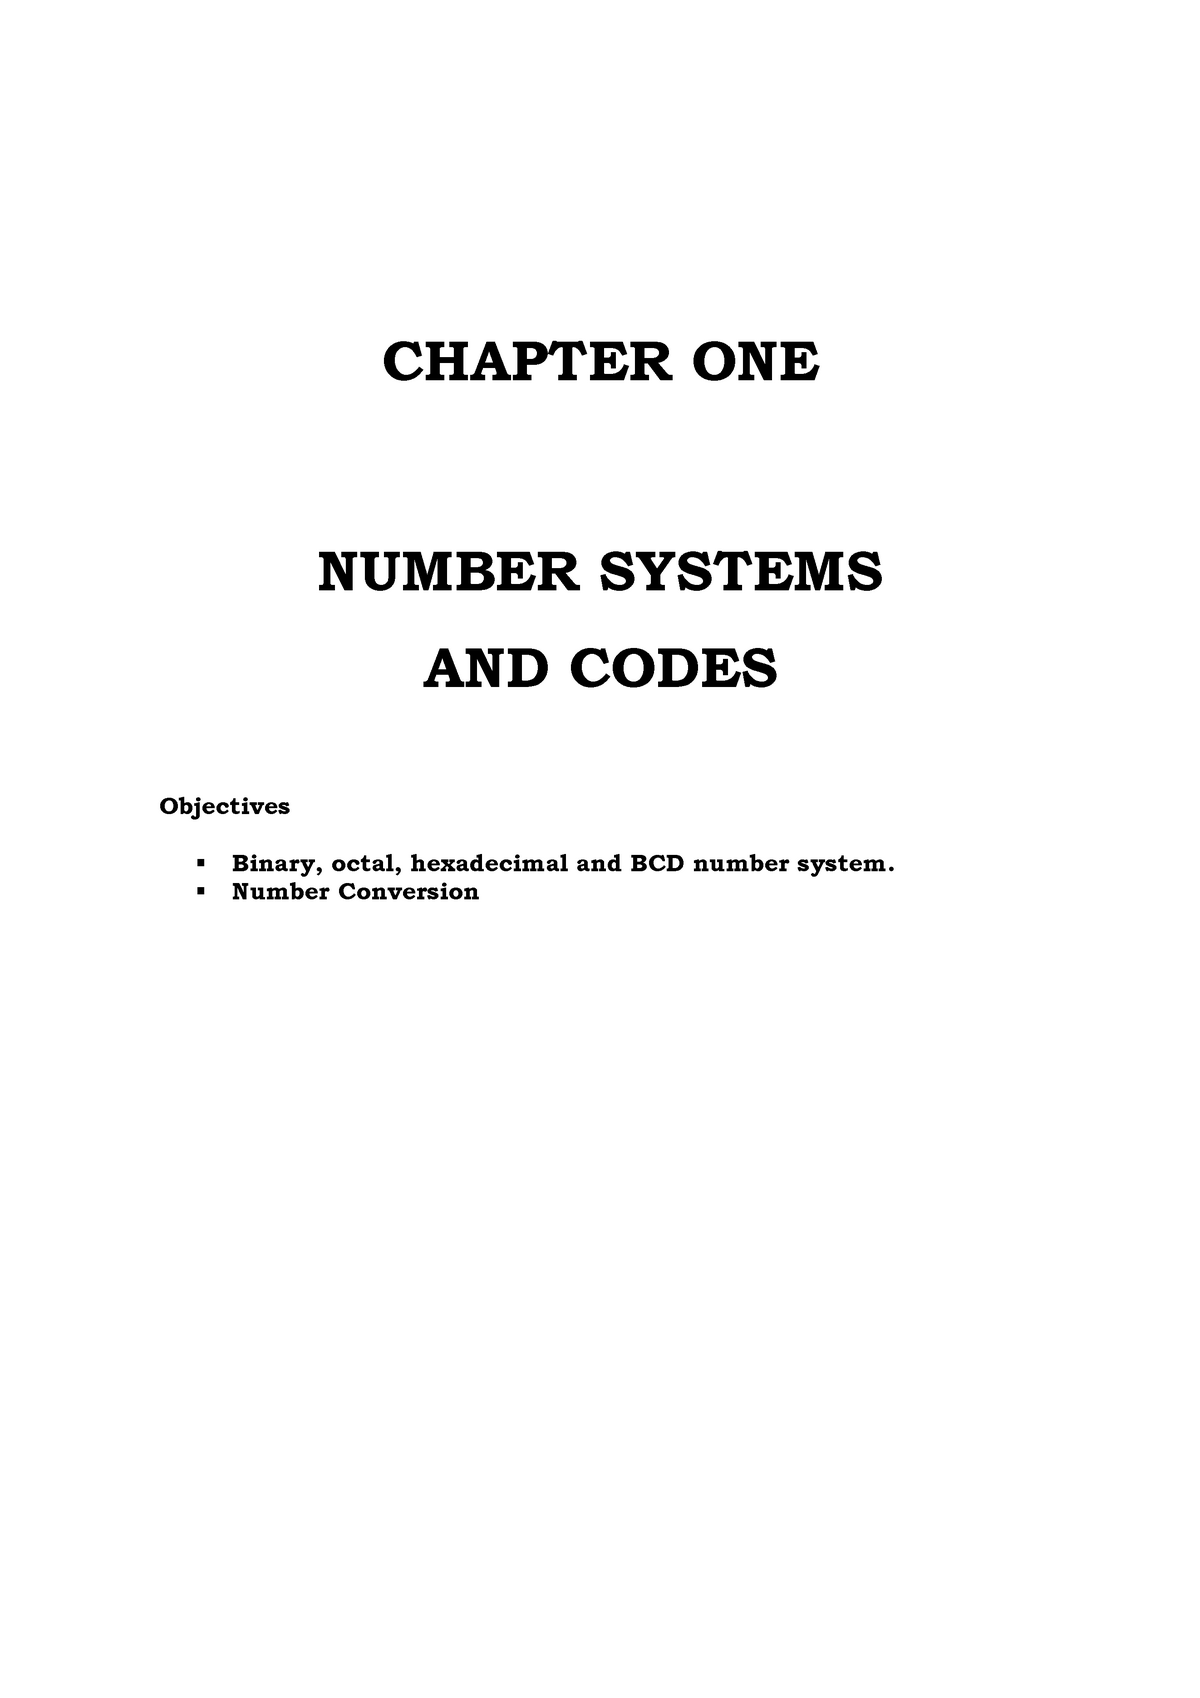 Chapter 1 Note Chapter One Number Systems And Codes Objectives Binary Octal Hexadecimal